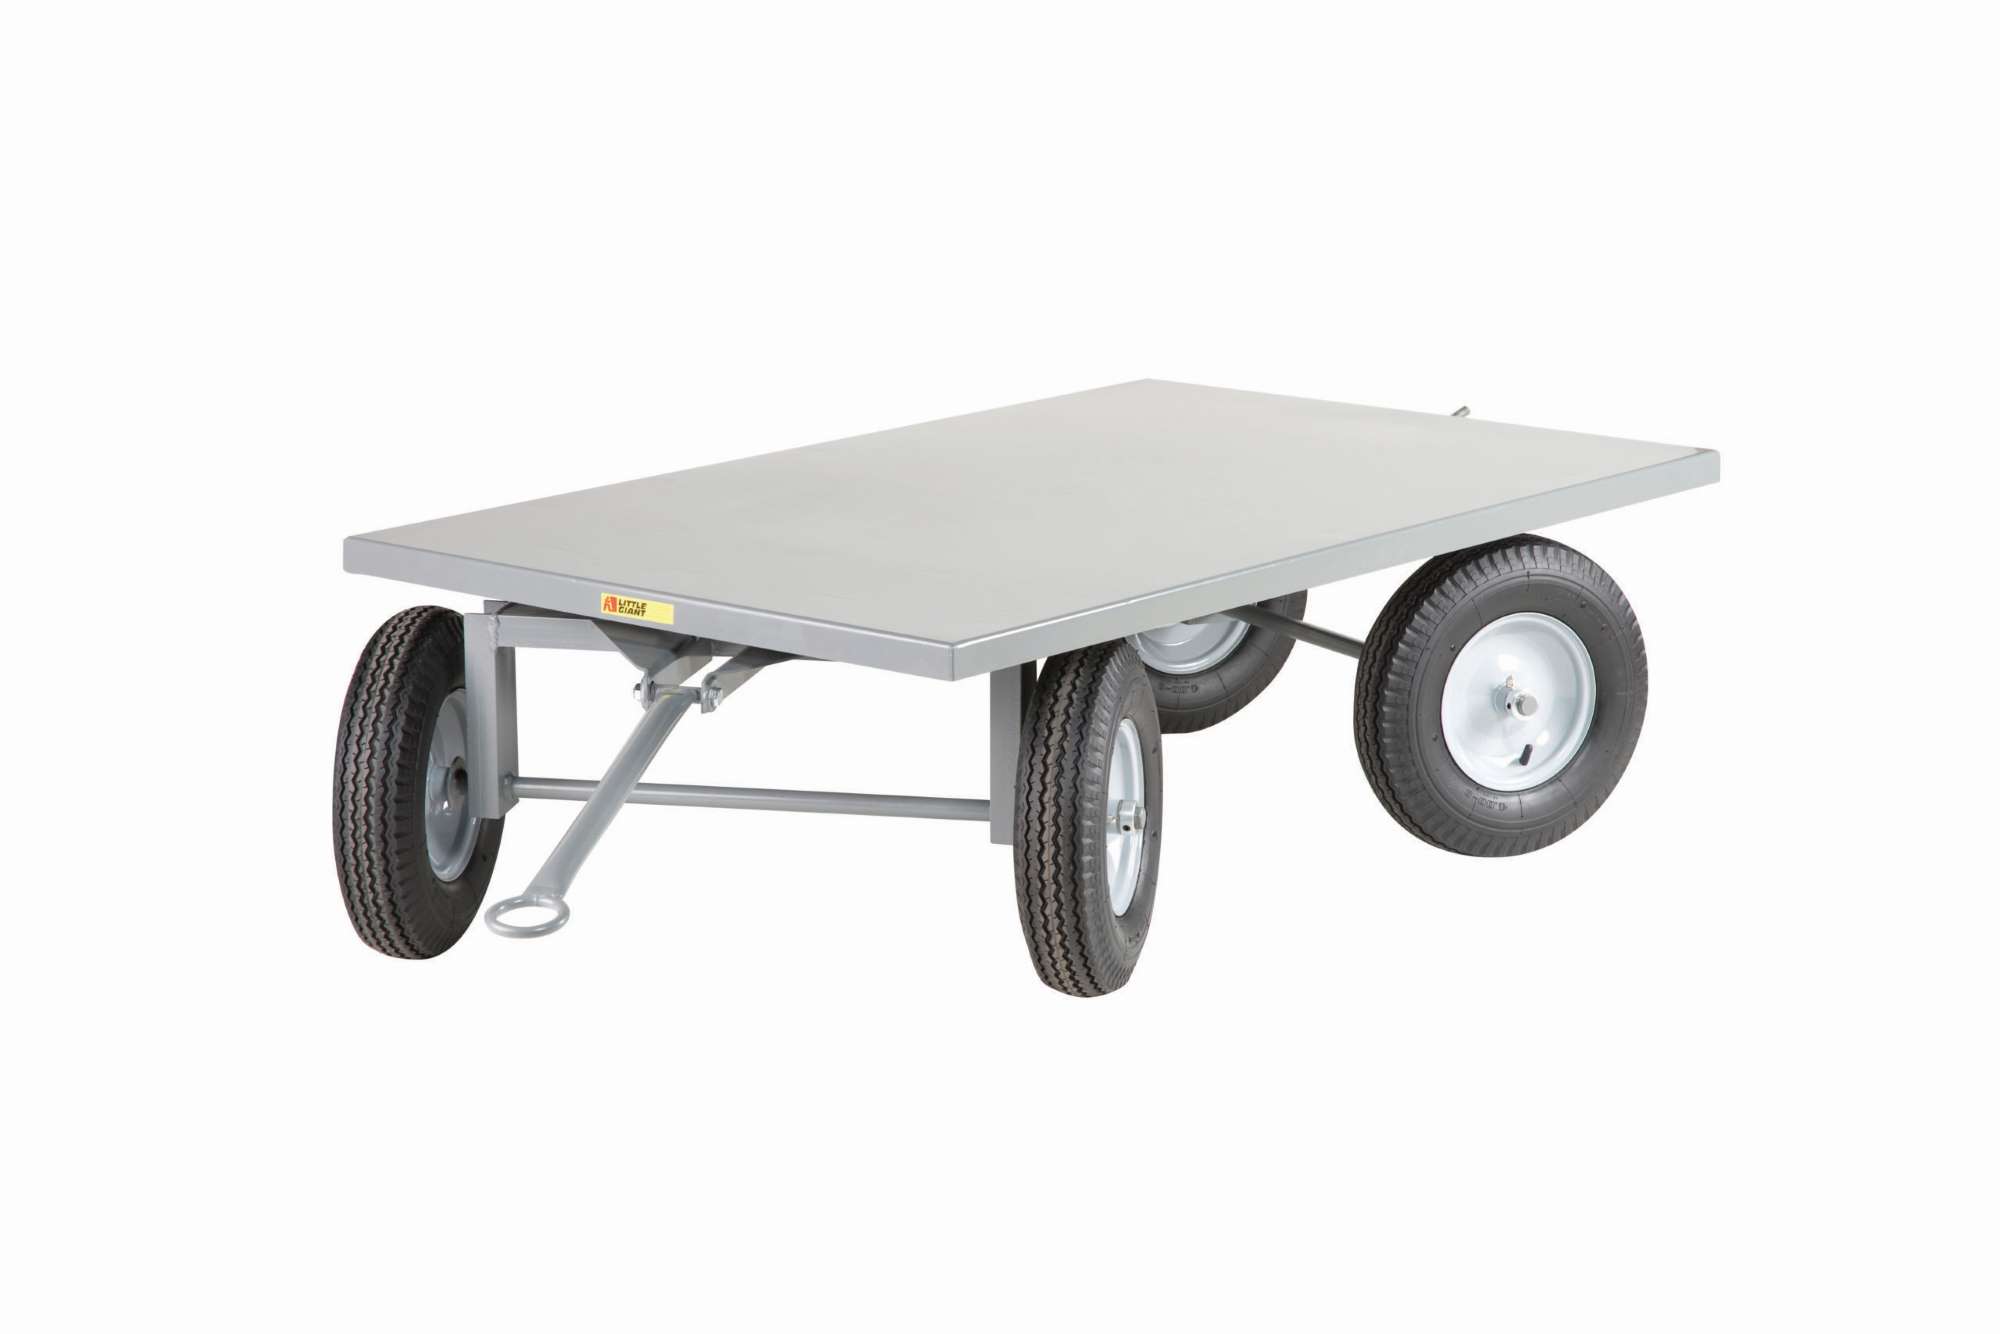 5th wheel steer tracking trailer, Little Giant, pneumatic wheels, Hitch Ring Drawbar, Pin and Clevis Hitch